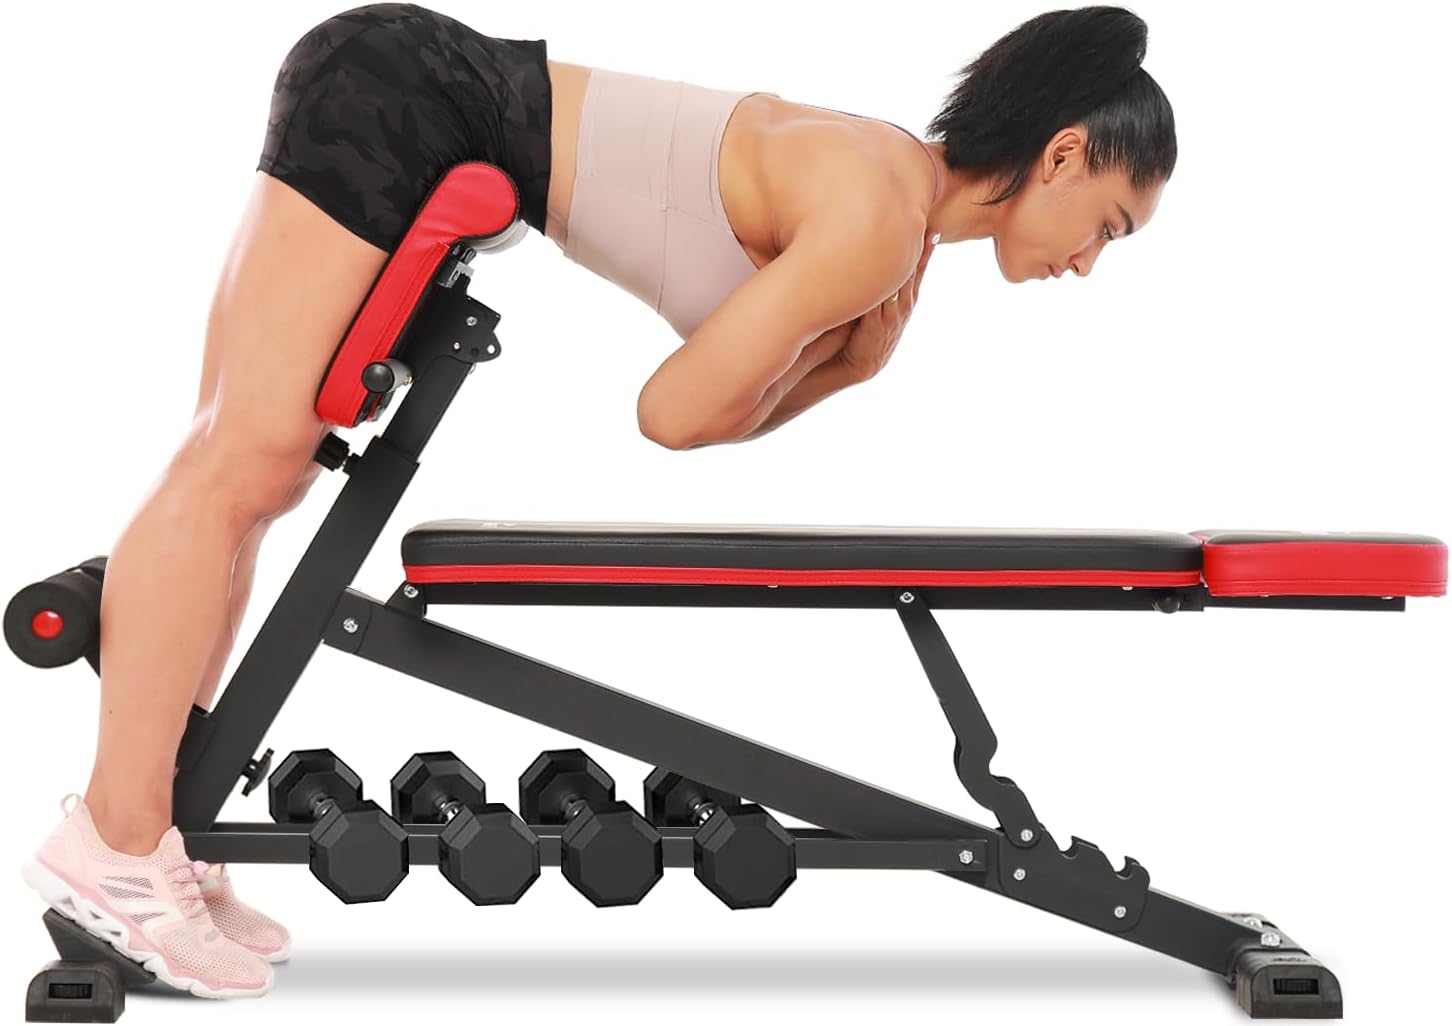 FLYBIRD 3 in 1 Workout Bench, Roman Chair, Weight Bench and Sit Up Bench - $90